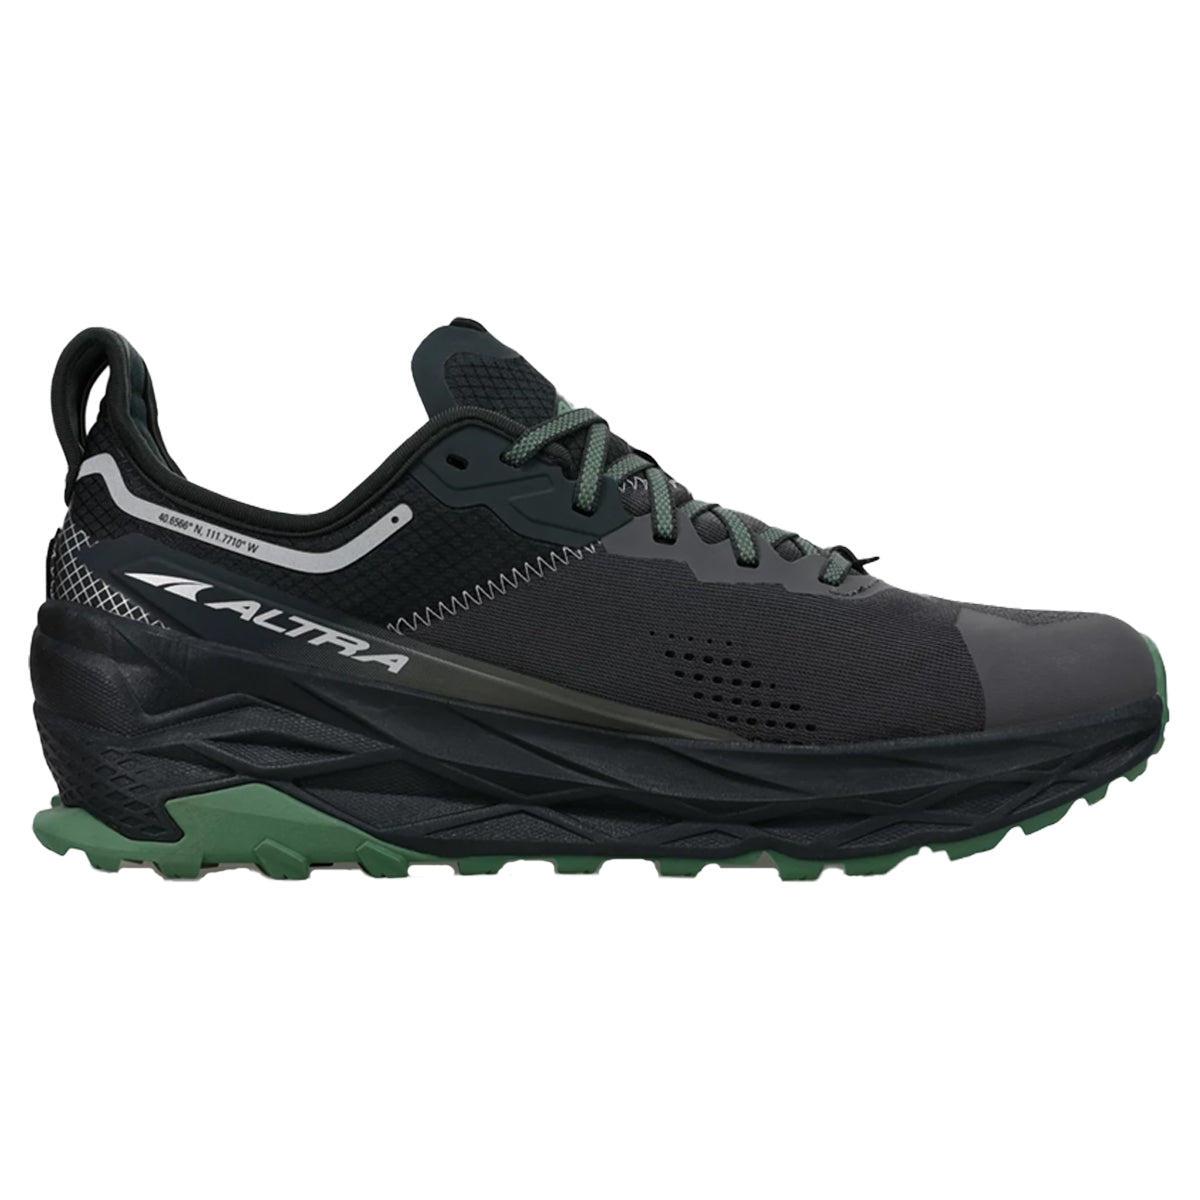 Altra Olympus 5 in Black & Gray by GOHUNT | Altra - GOHUNT Shop